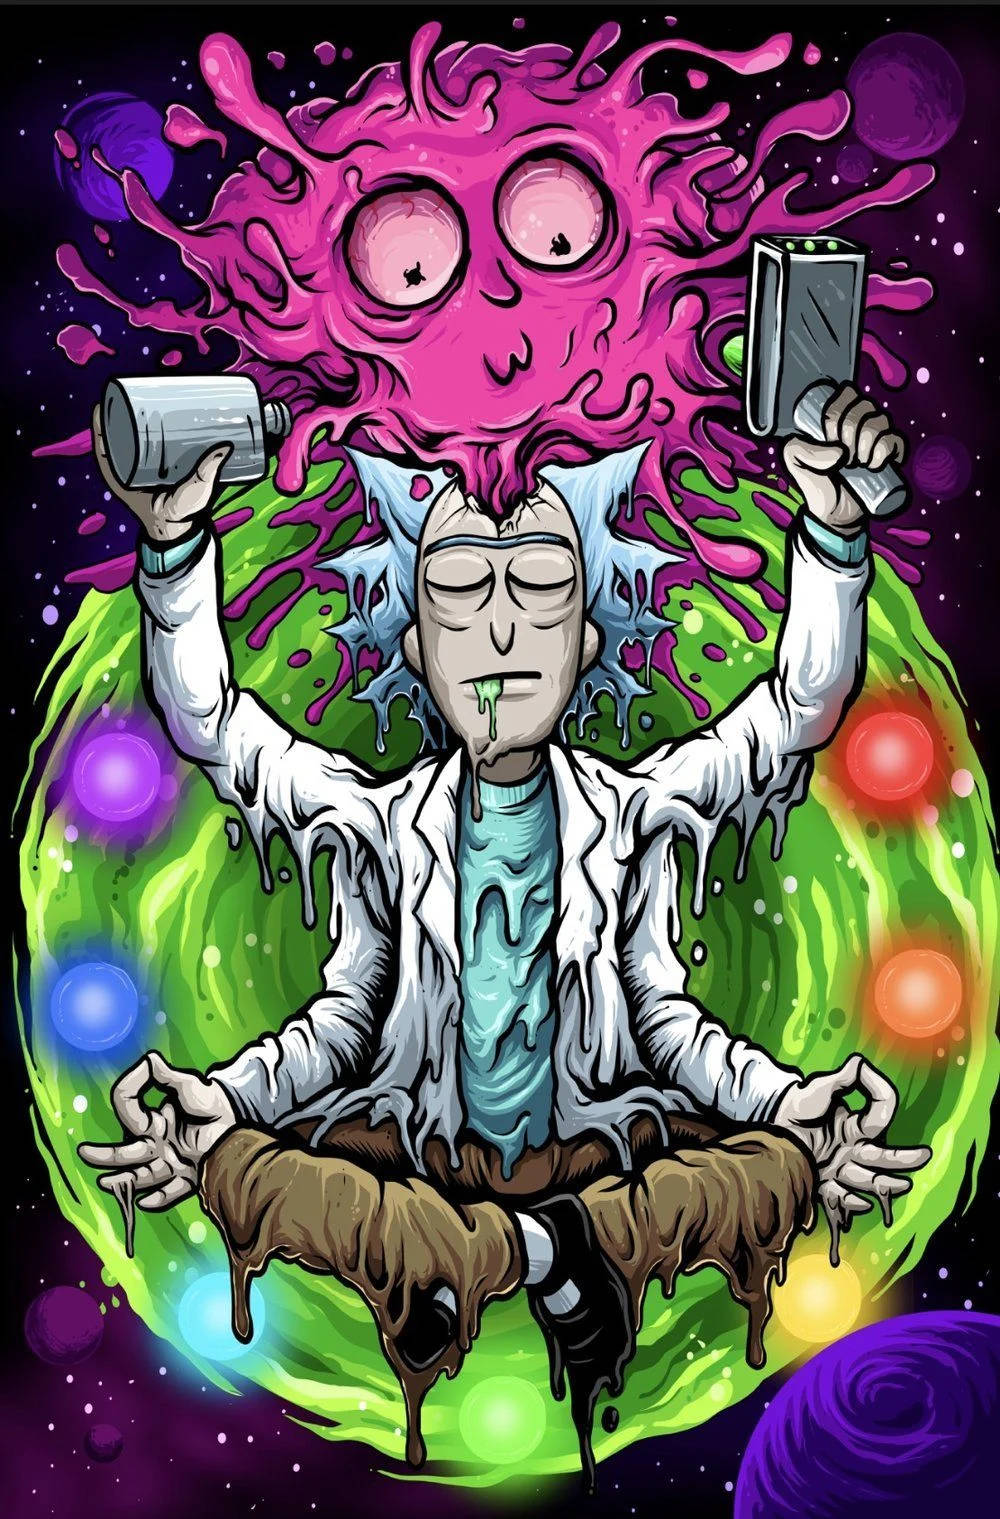 Free Rick And Morty Weed Wallpaper Downloads, [100+] Rick And Morty Weed  Wallpapers for FREE 